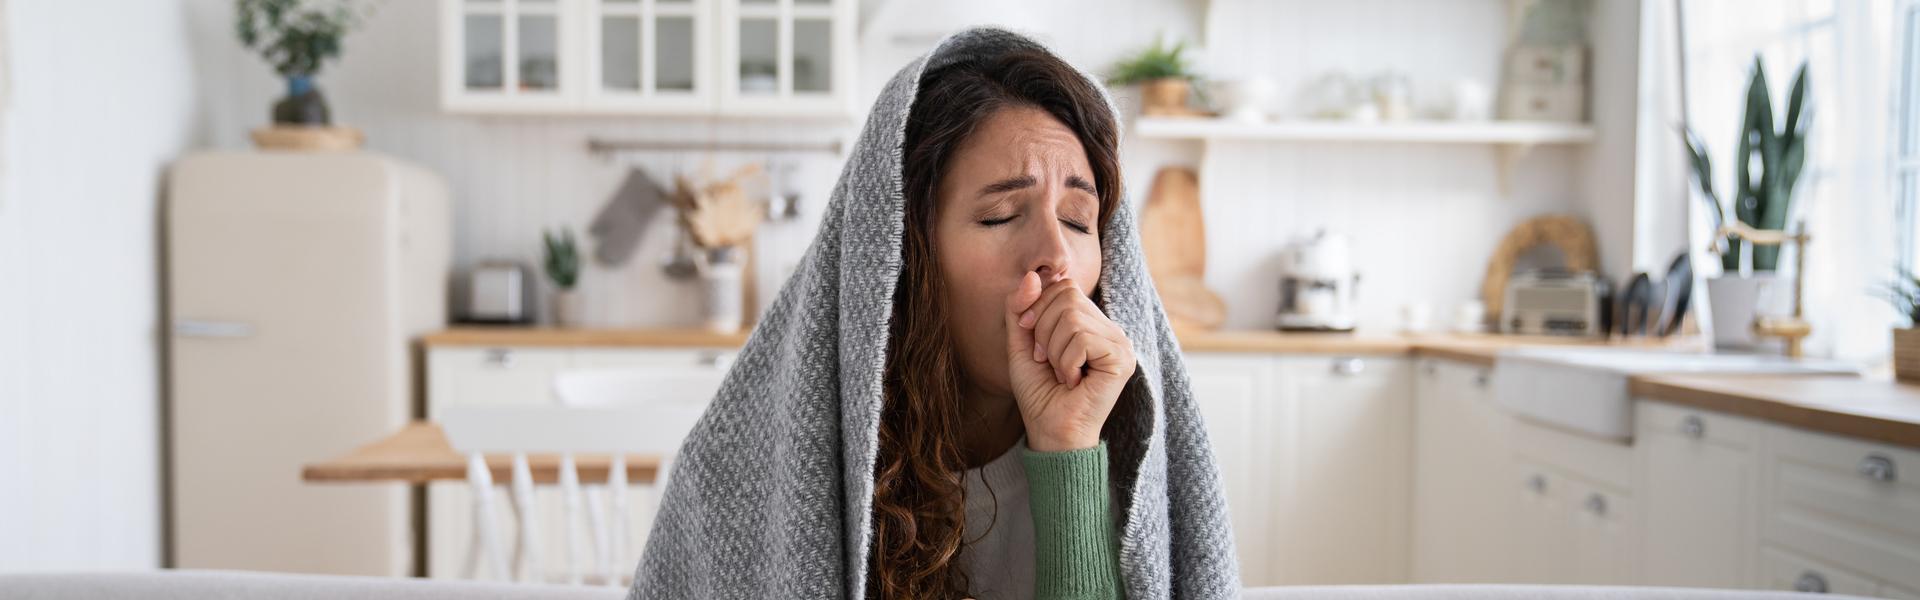 Know Why Should Go to the Urgent Care for Flu